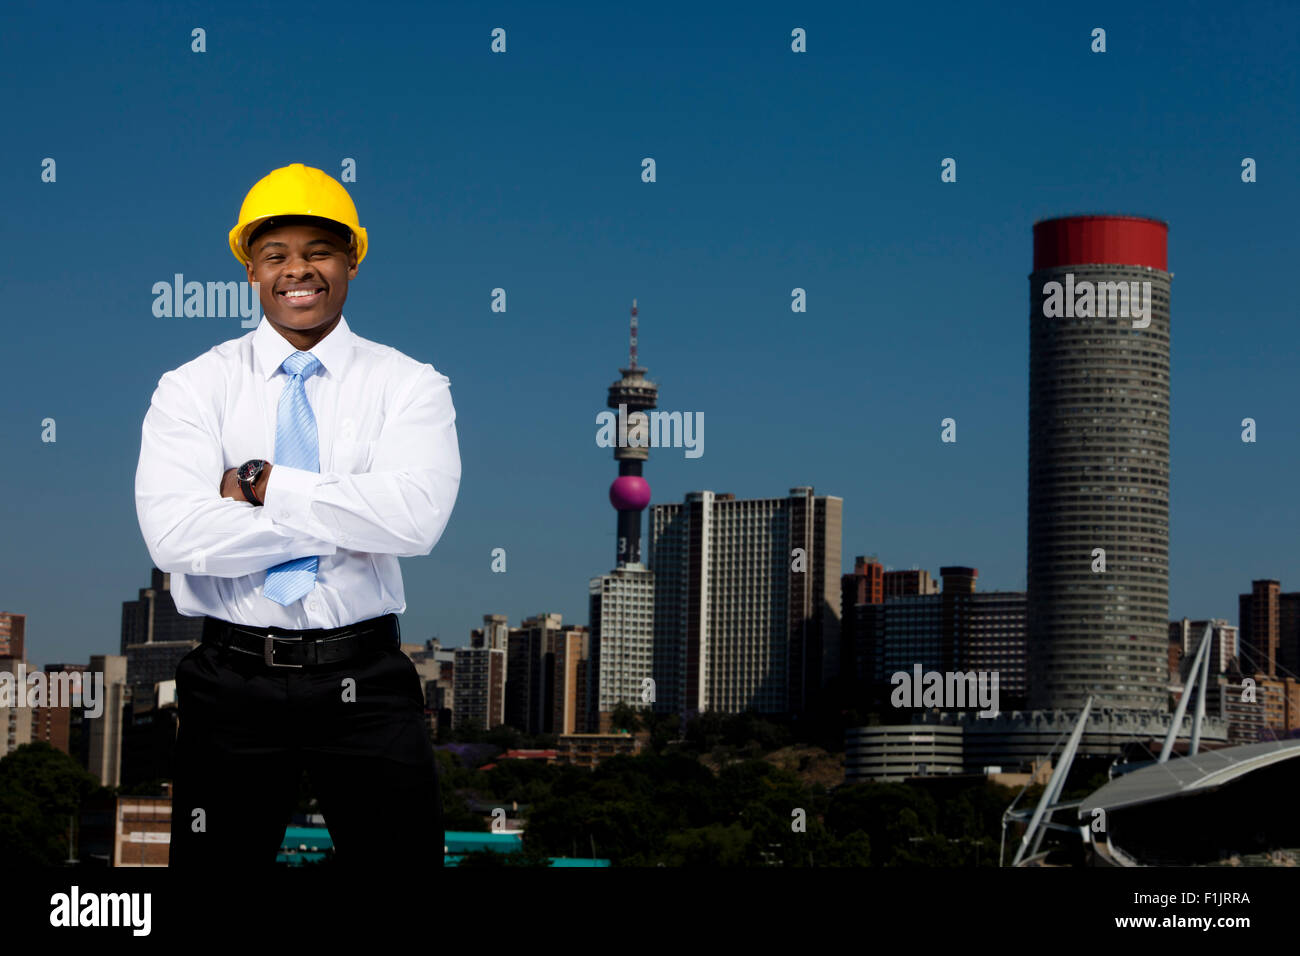 Smartly dressed business man wearing hardhat stands with arms crossed with cityscape in background Stock Photo